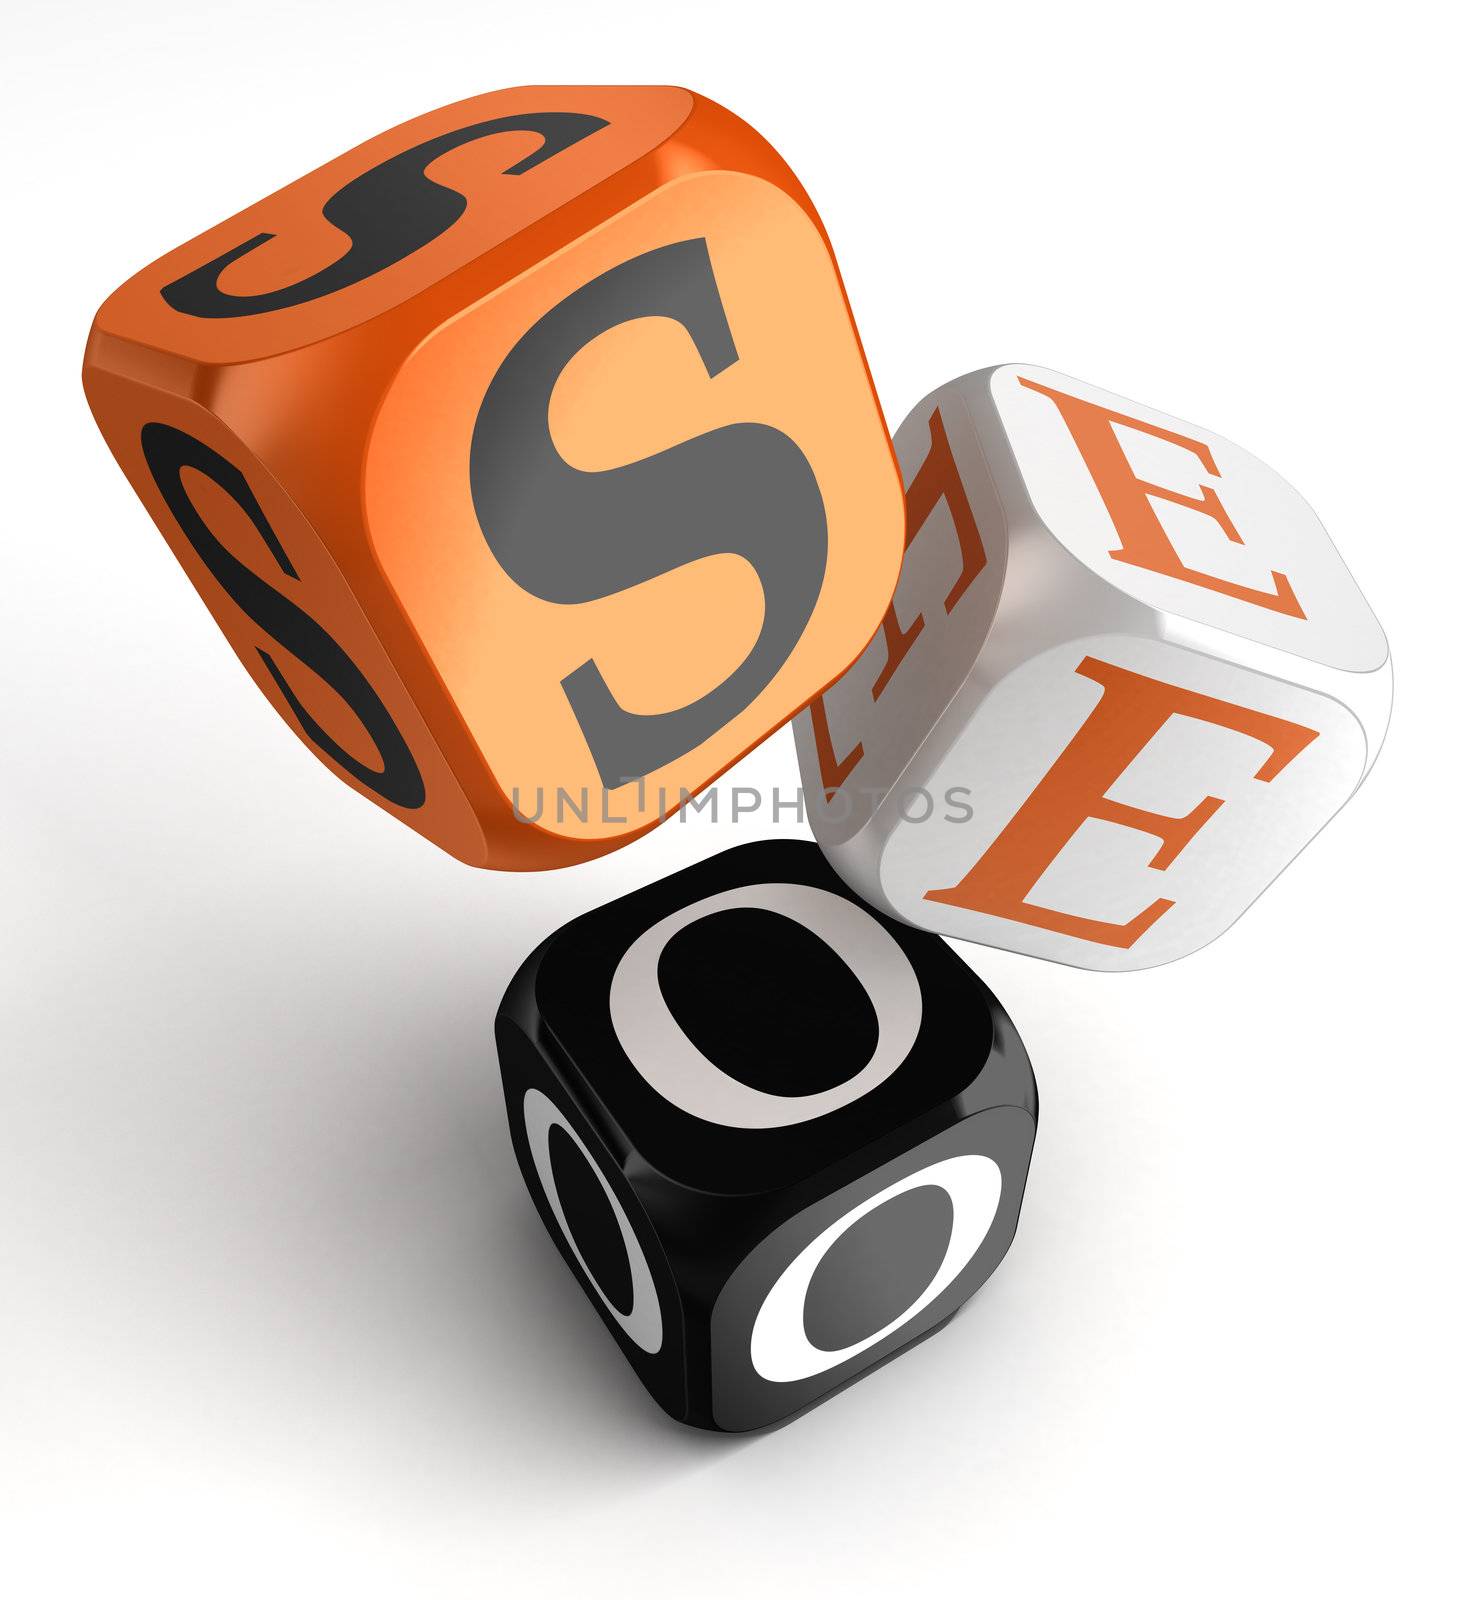 seo orange black dice blocks on white background. clipping path included